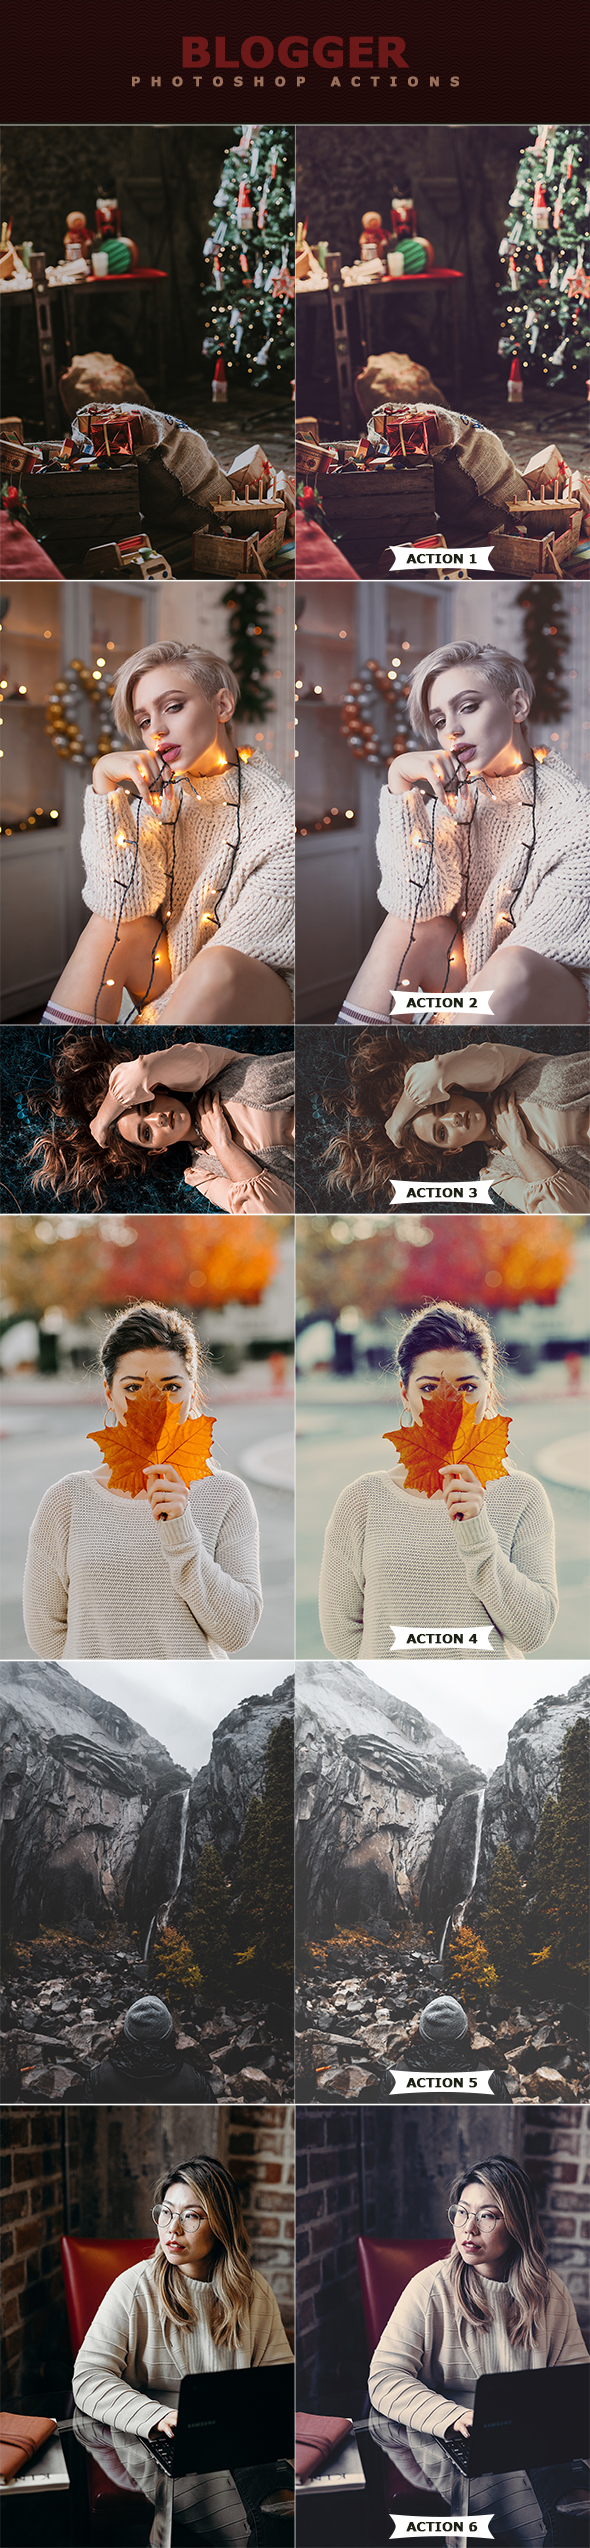 4 IN 1 Photoshop Actions Bundle